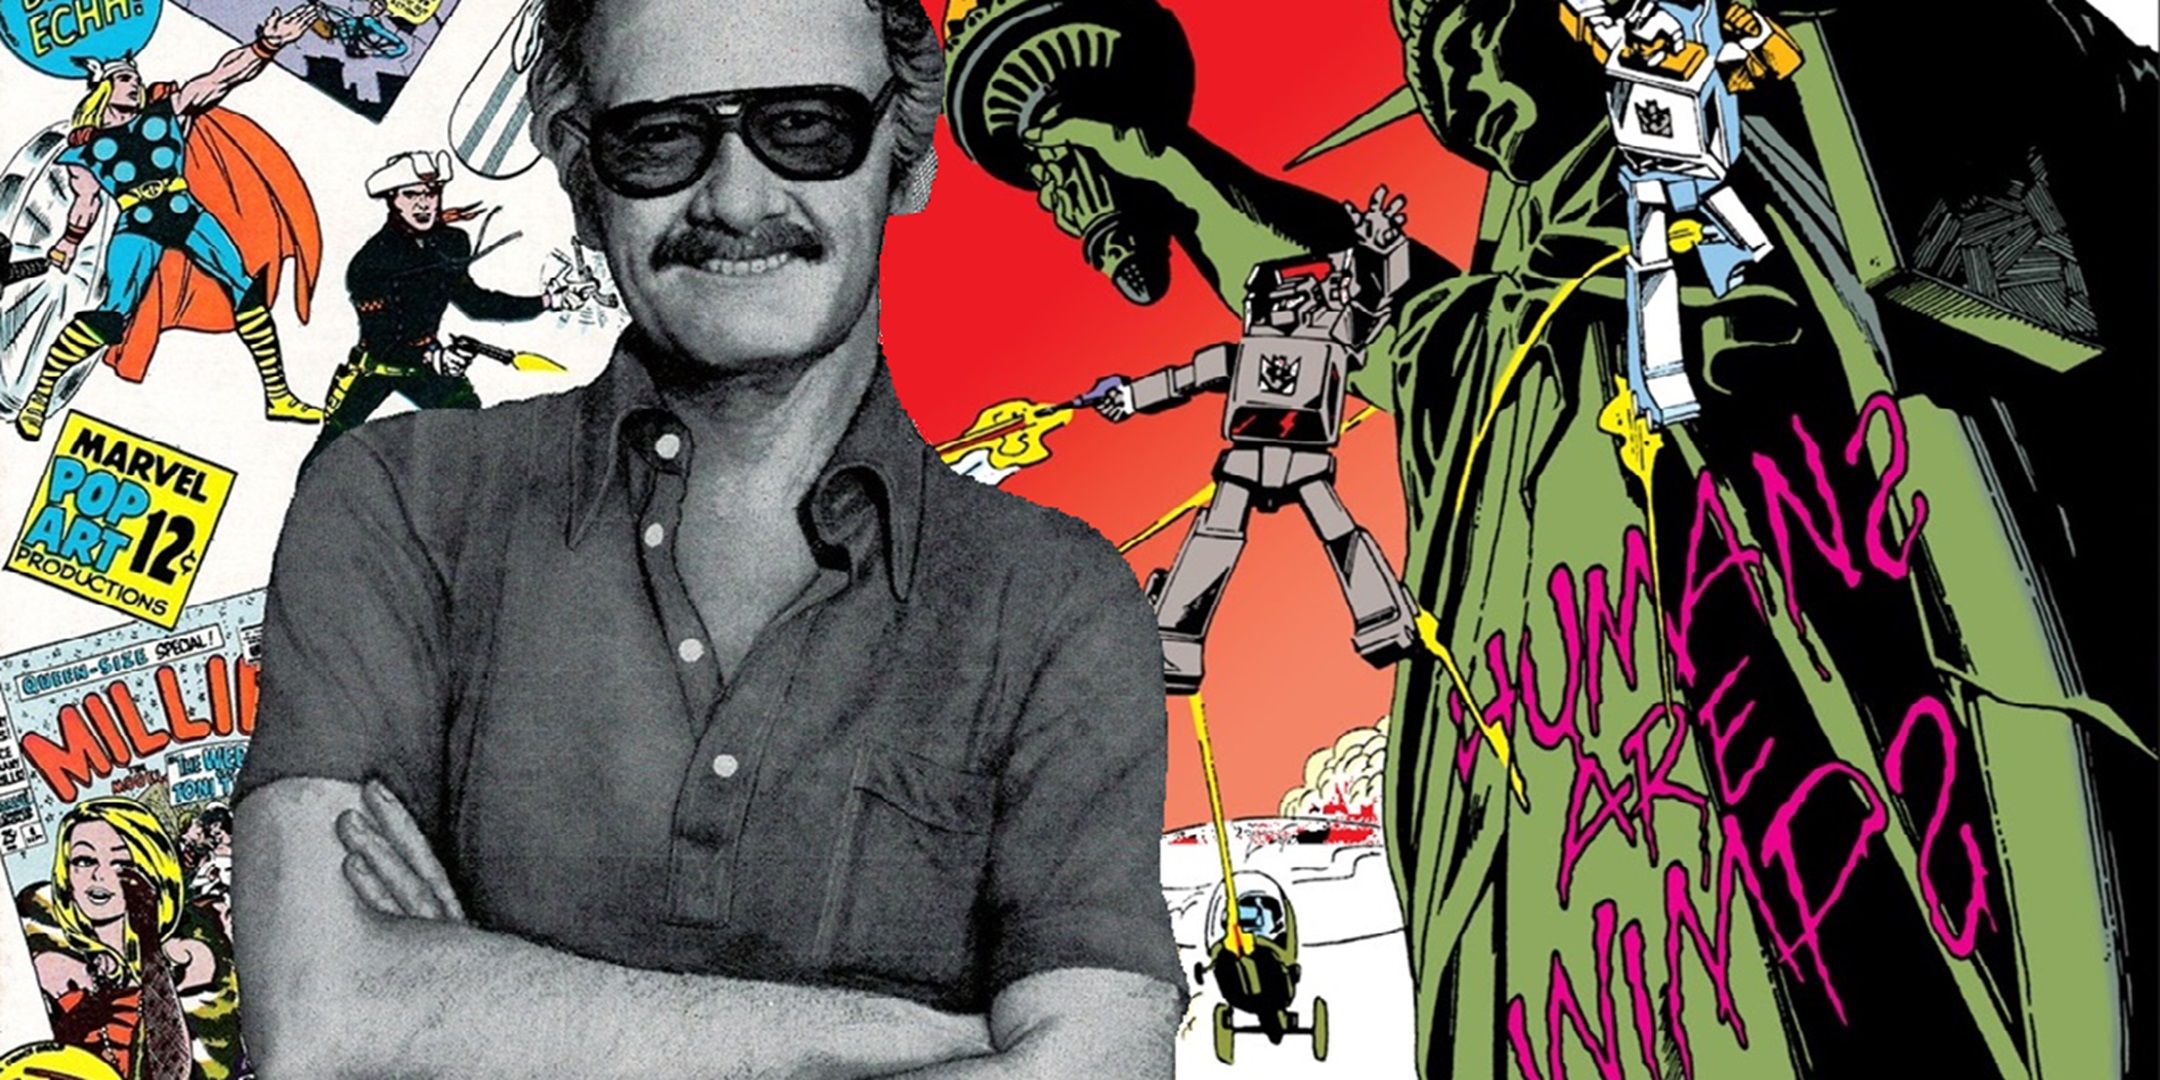 Stan Lee next to a Transformers cover